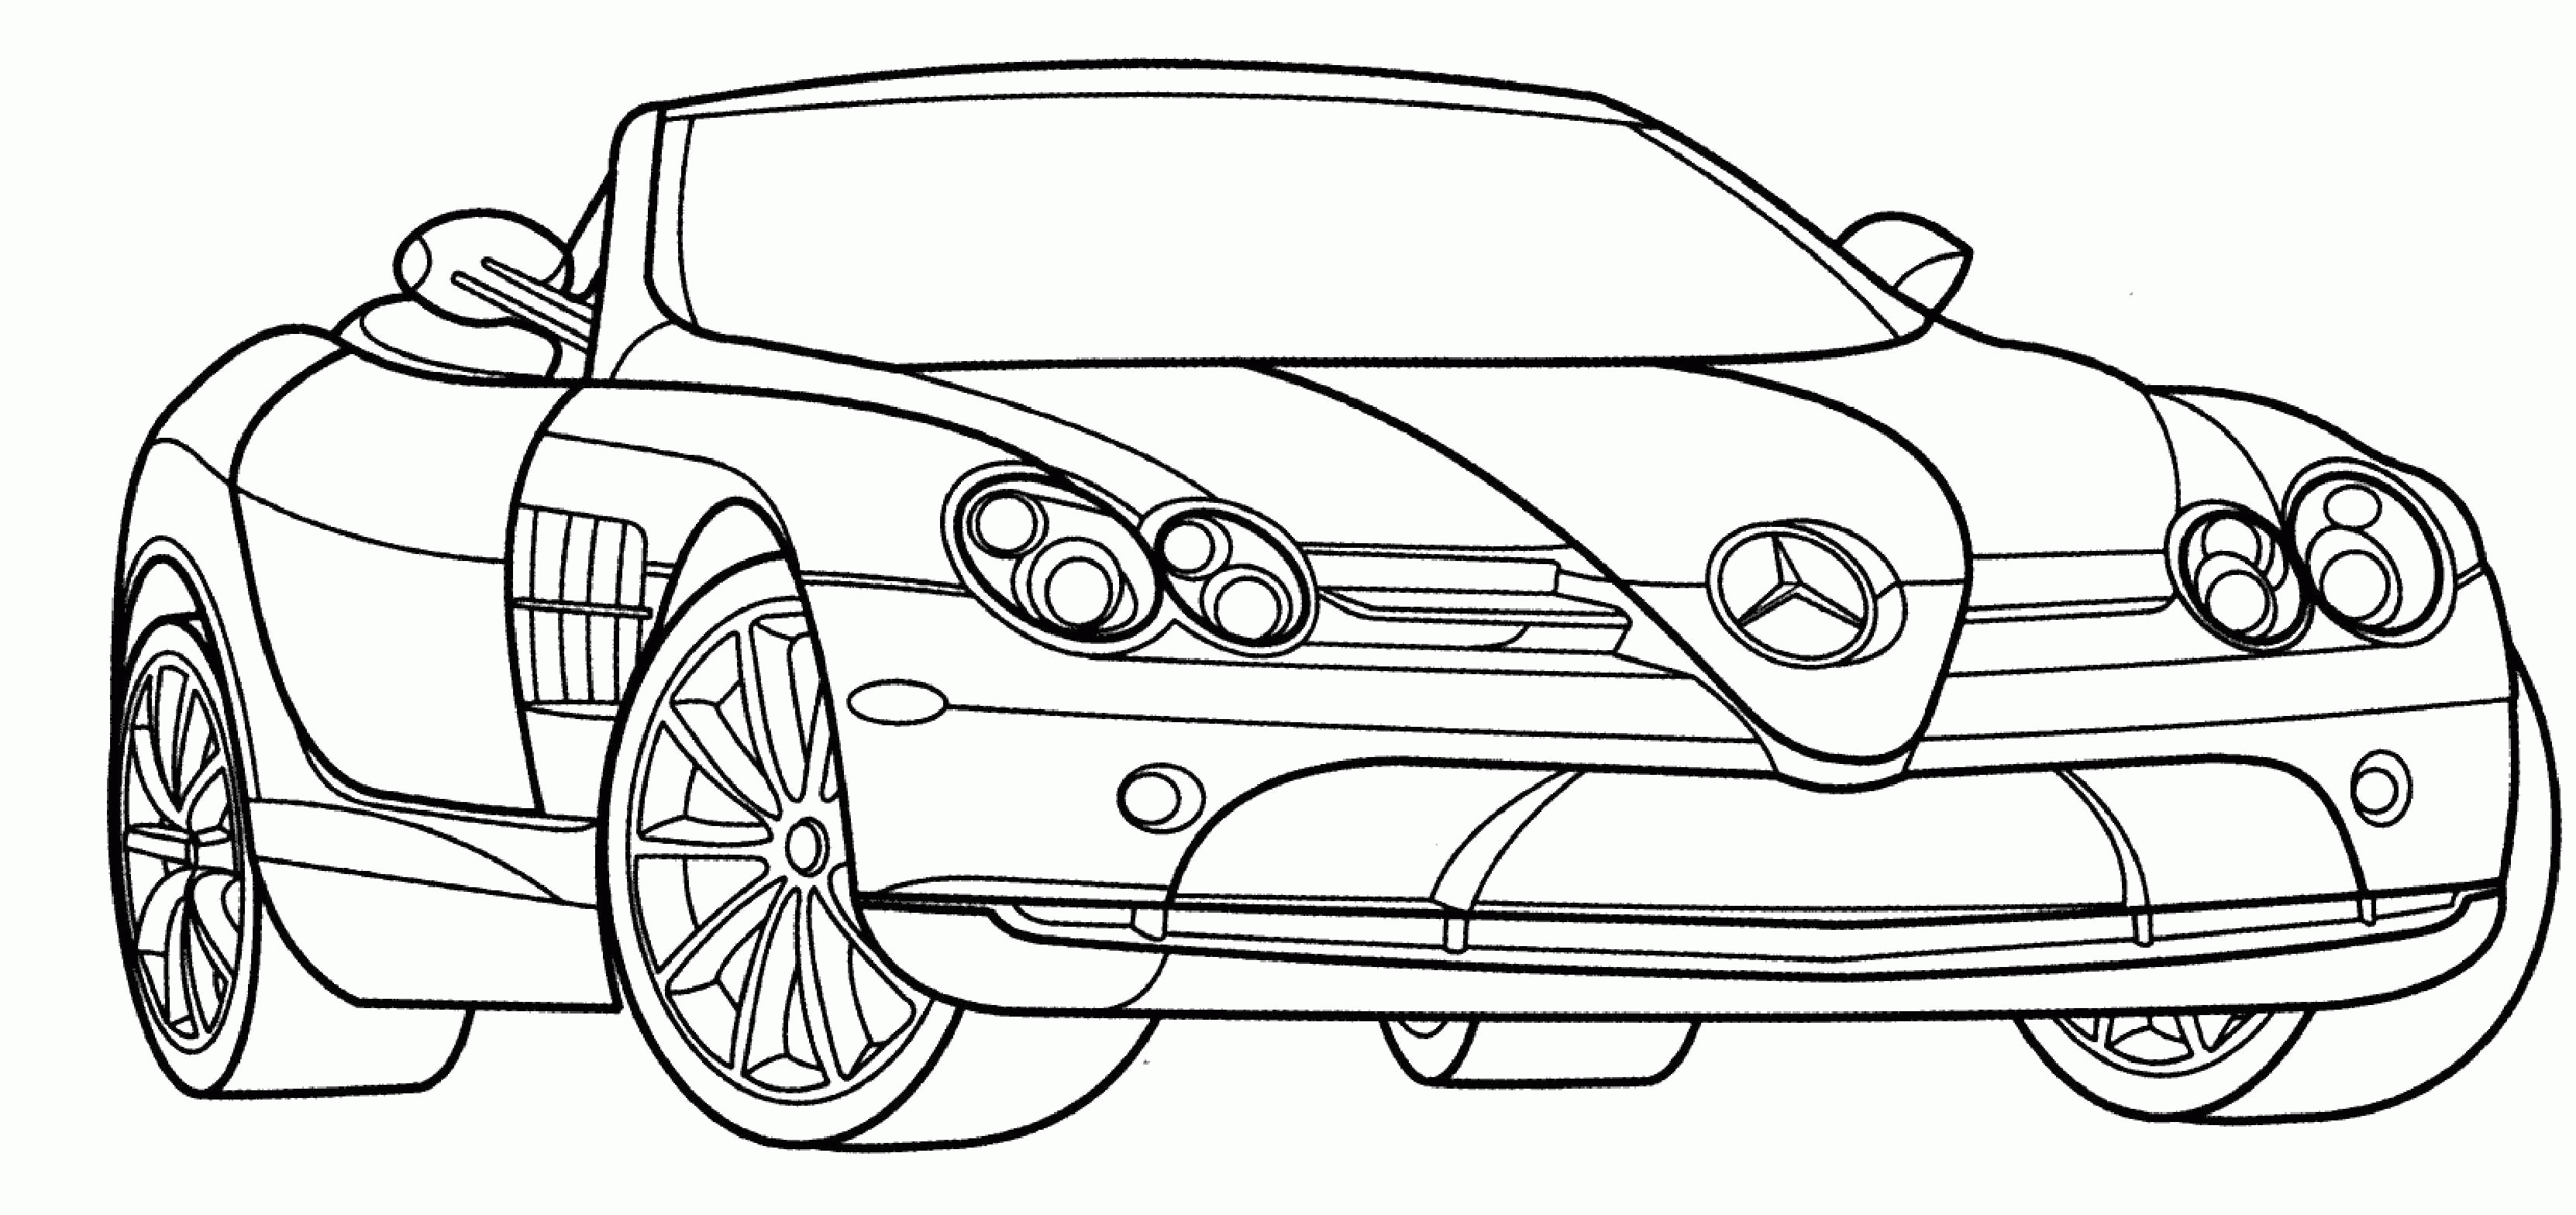 Nice Sport Cars Coloring Pages Resume Format Download Pdf - Widetheme